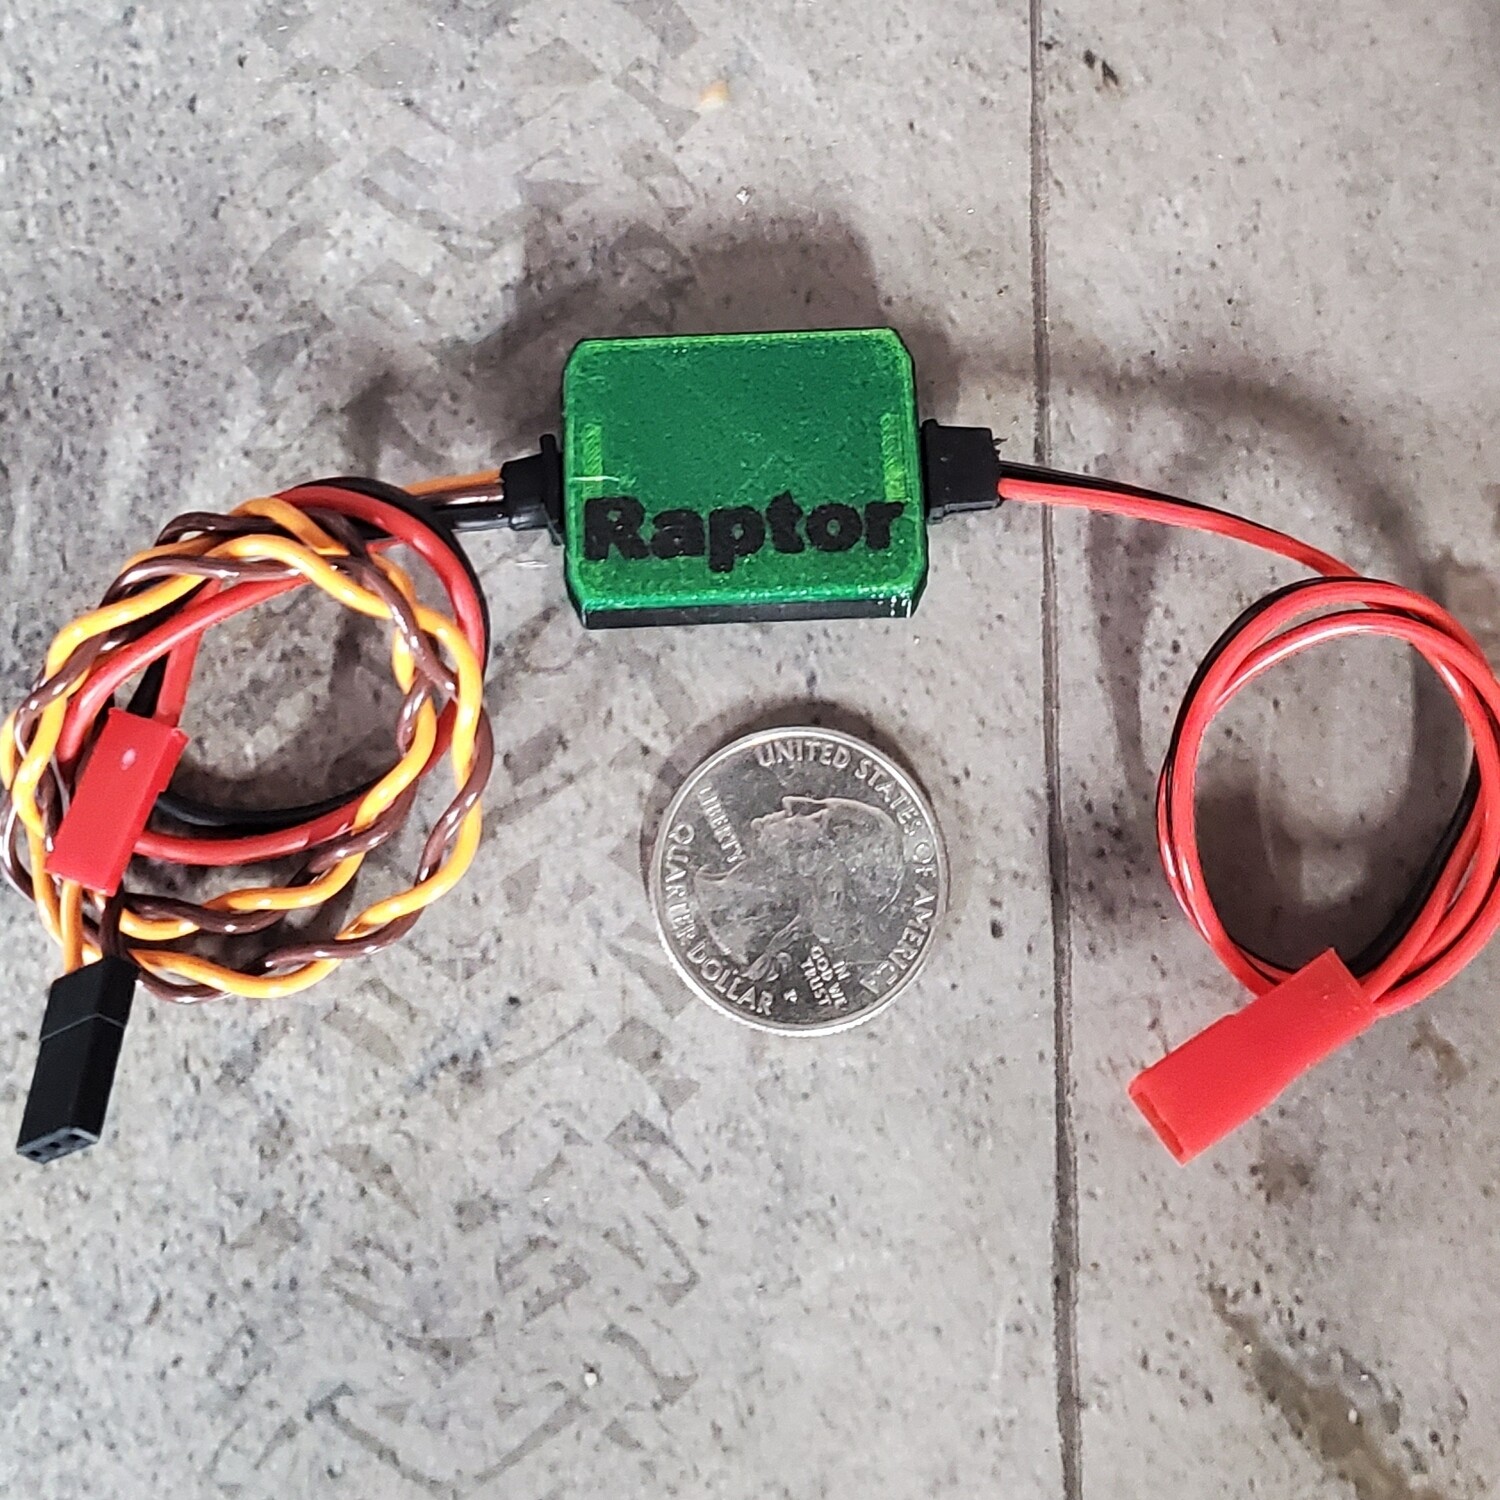 The Raptor Plug and Pull winch controller